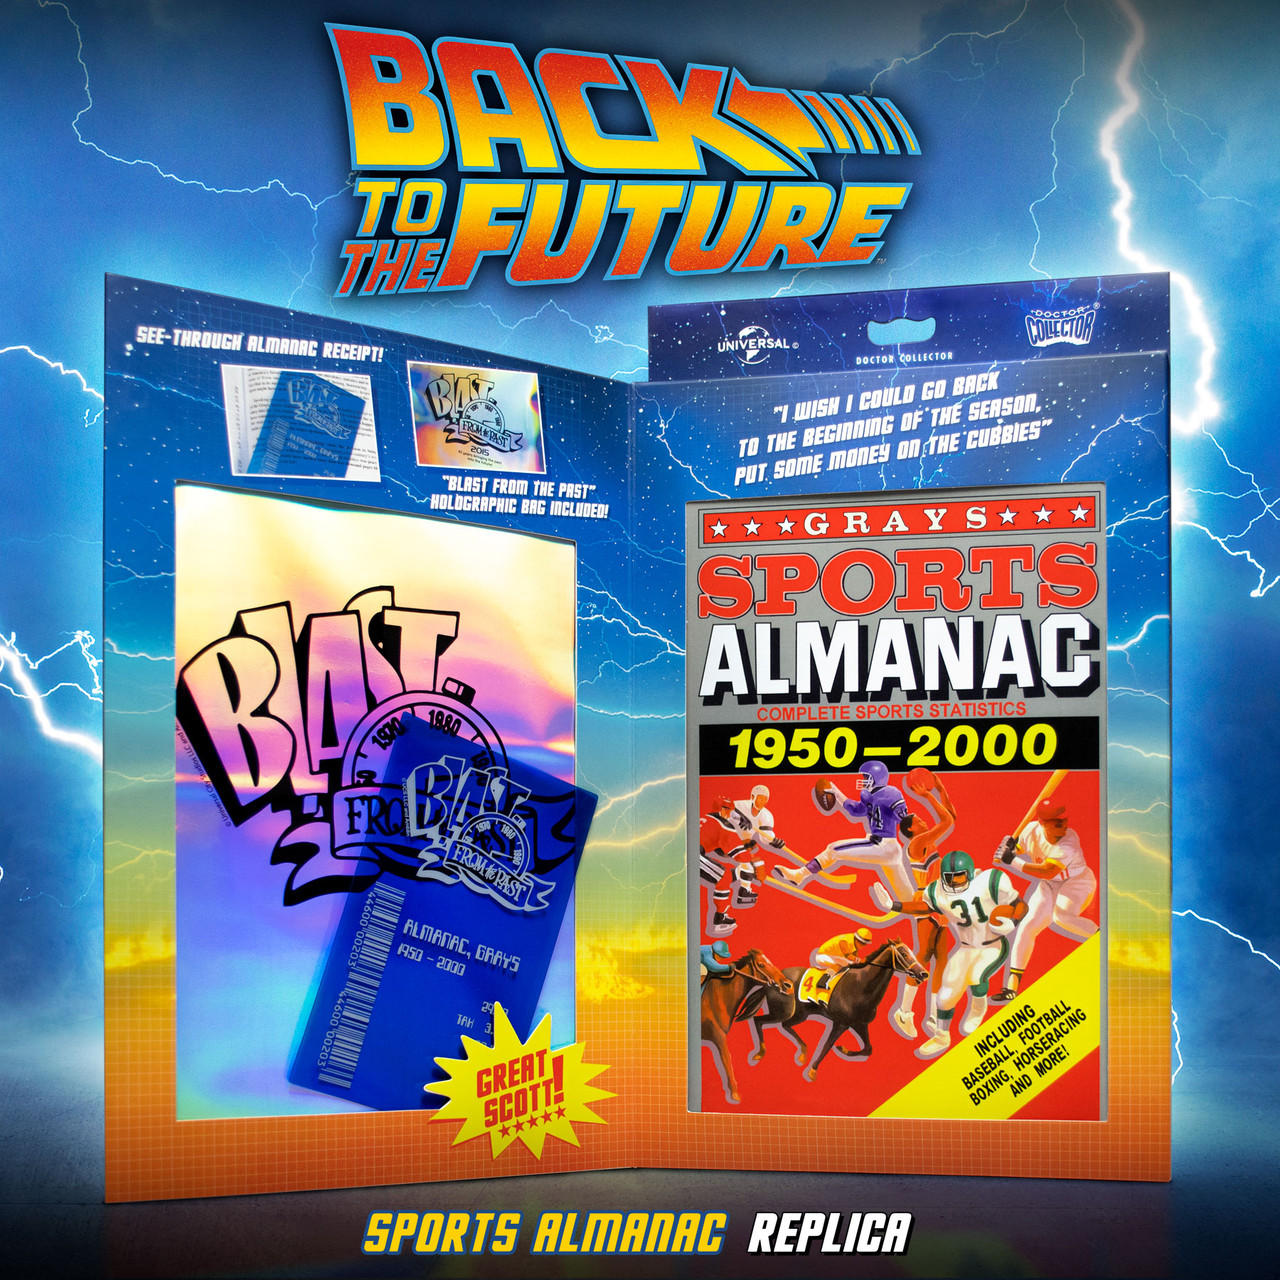 Back to the Future (of Gaming): Fresno's GoBack Gaming